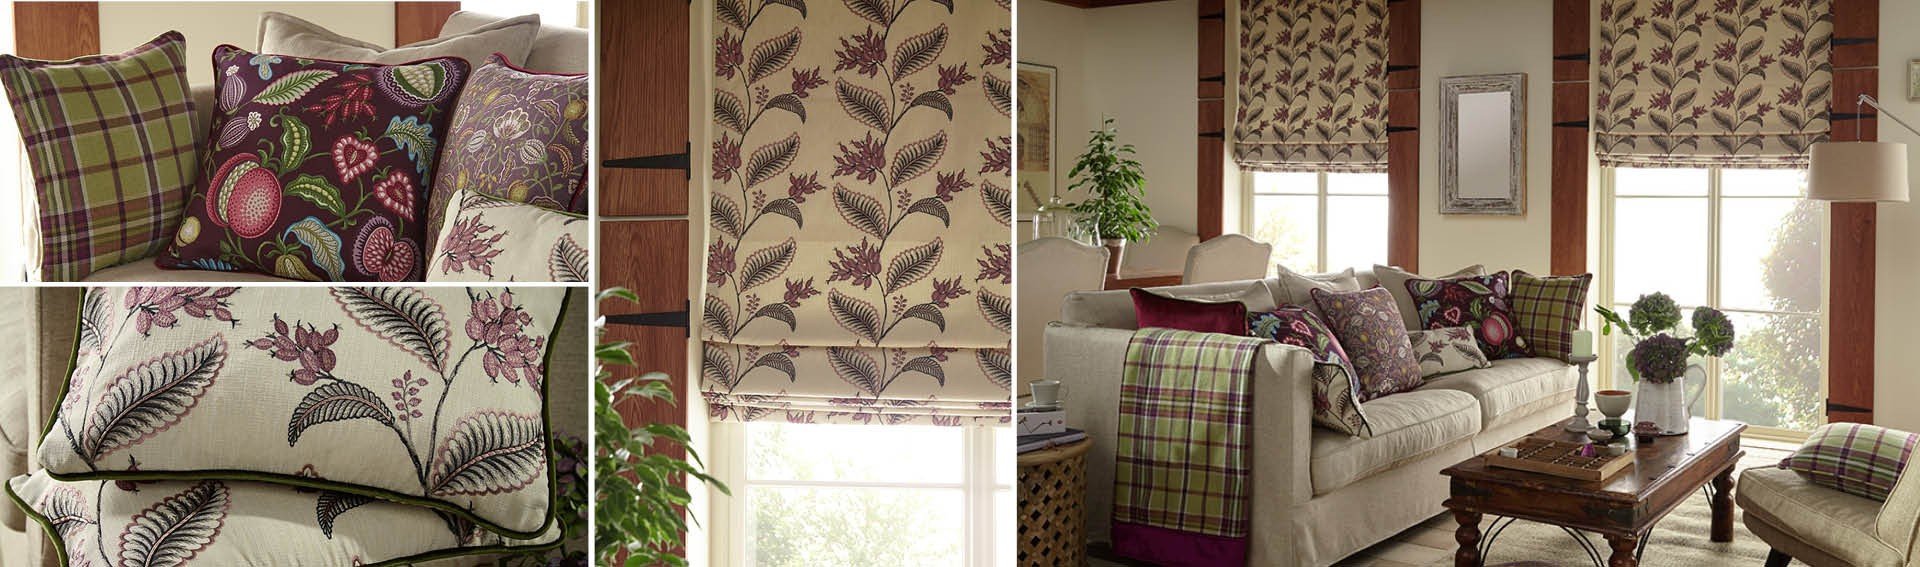 Roman Blind in Red Berry Design